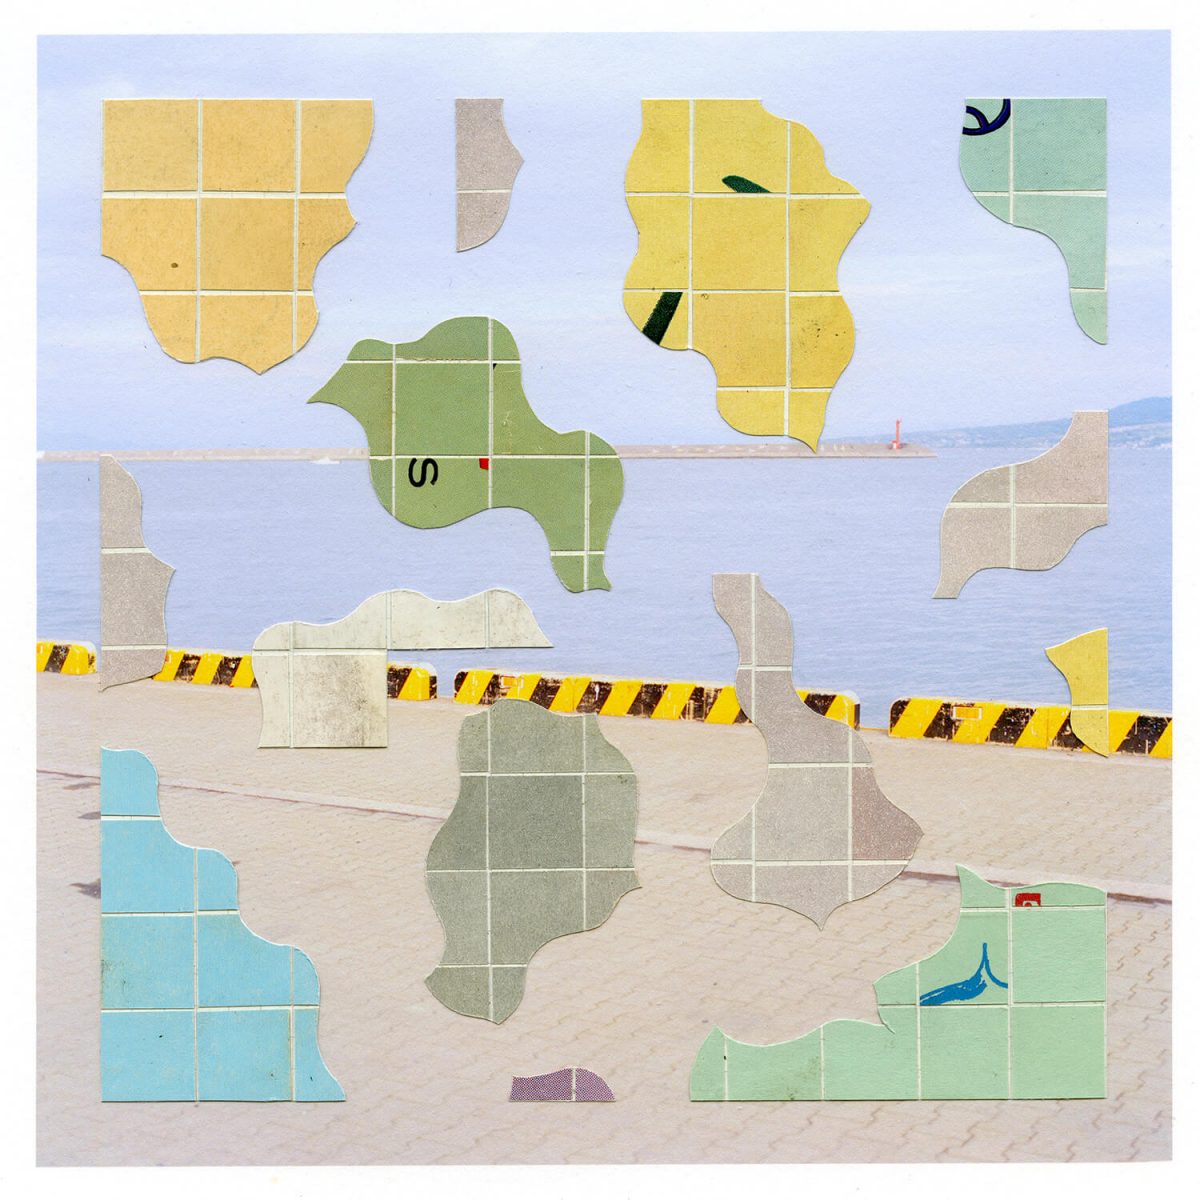 Unique collage and photograph by Anthony Gerace